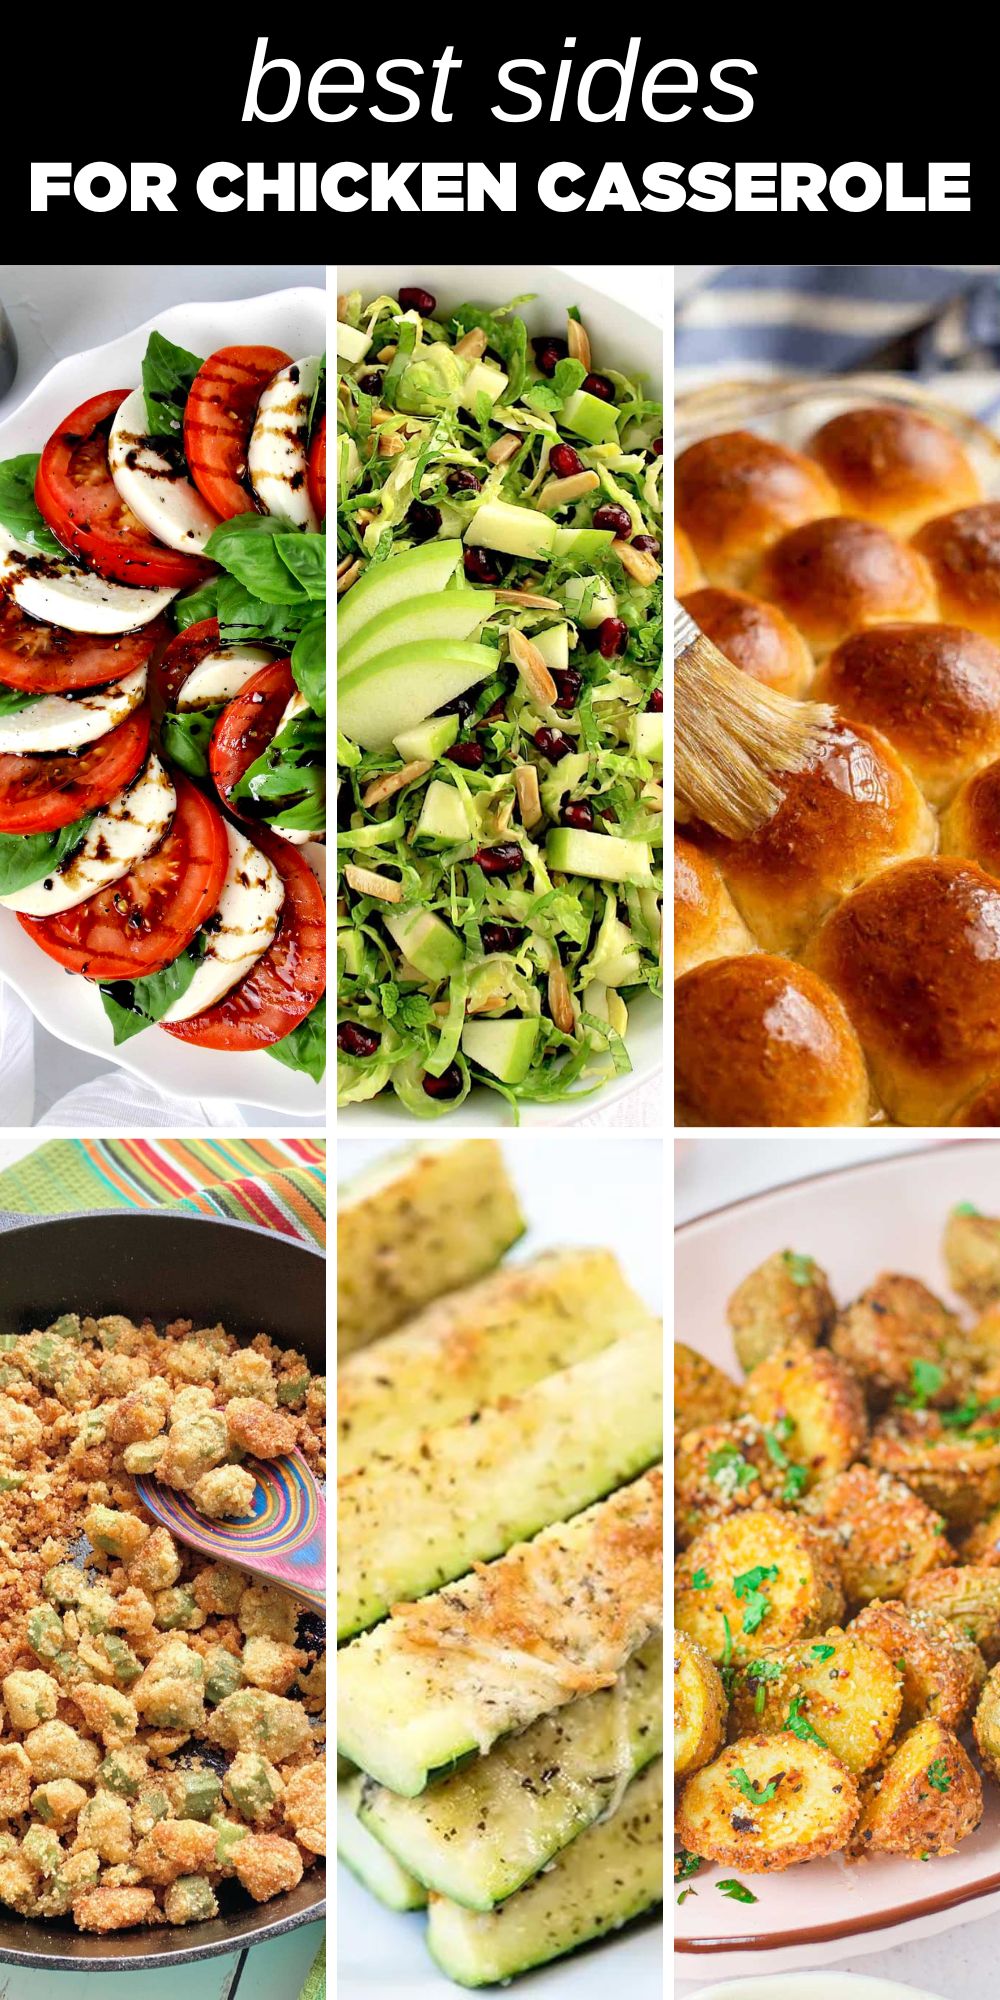 These easy side dish recipes complement the richness and creaminess of the chicken and rice mixture perfectly. We’ve included everything from simple side salad and tangy fruit salad recipes to roasted or sauteed veggies, homemade rolls, and more. There's something here for everyone.  